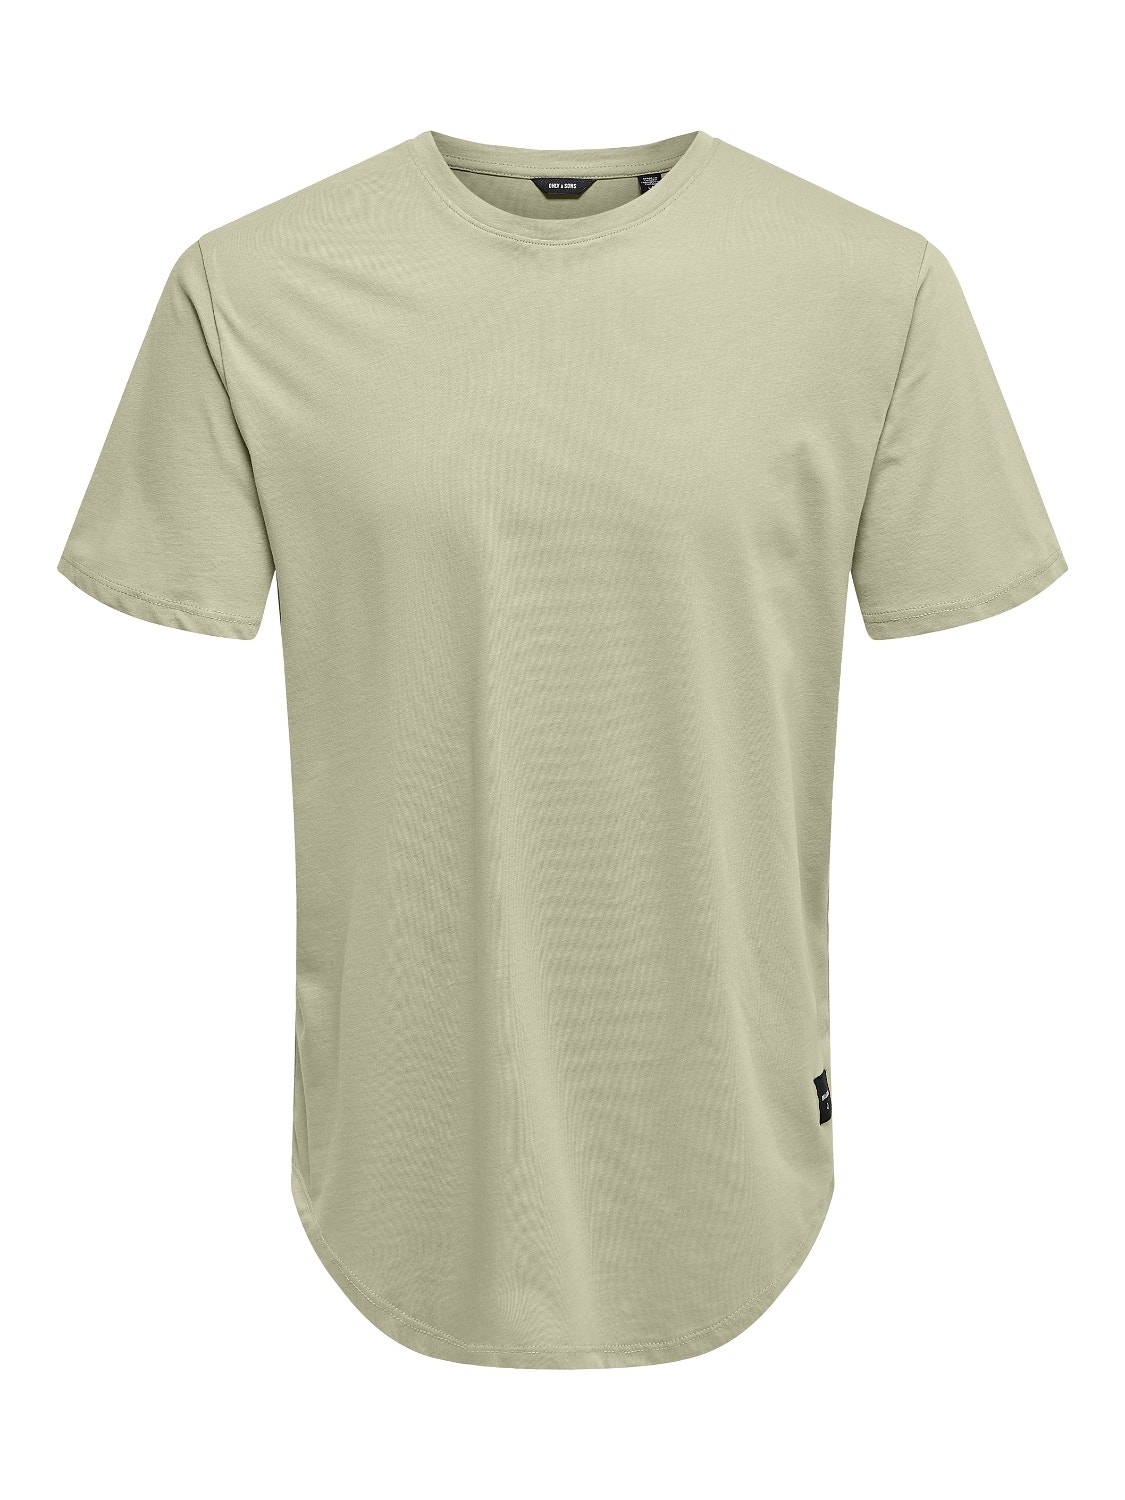 ONLY & SONS Long Line Fit Round Neck T-Shirt -Pelican - 22002973